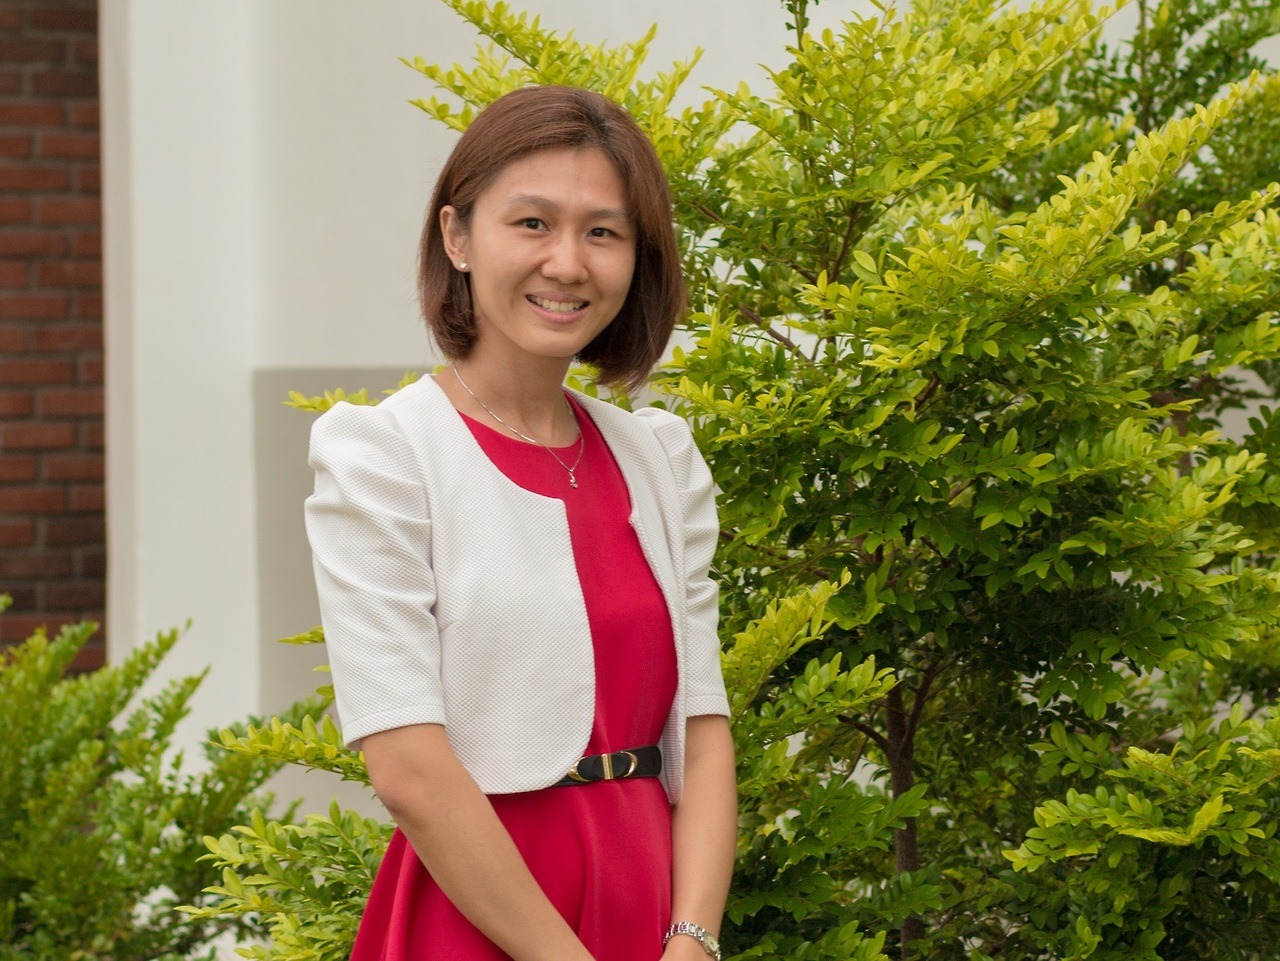 “Nine years ago, I moved from Singapore to Miri with my husband when he got a job in the oil and gas industry here. I was delighted to be able to land a job as a lecturer at Curtin Malaysia and carry on my teaching career here. “I am a recipient of...